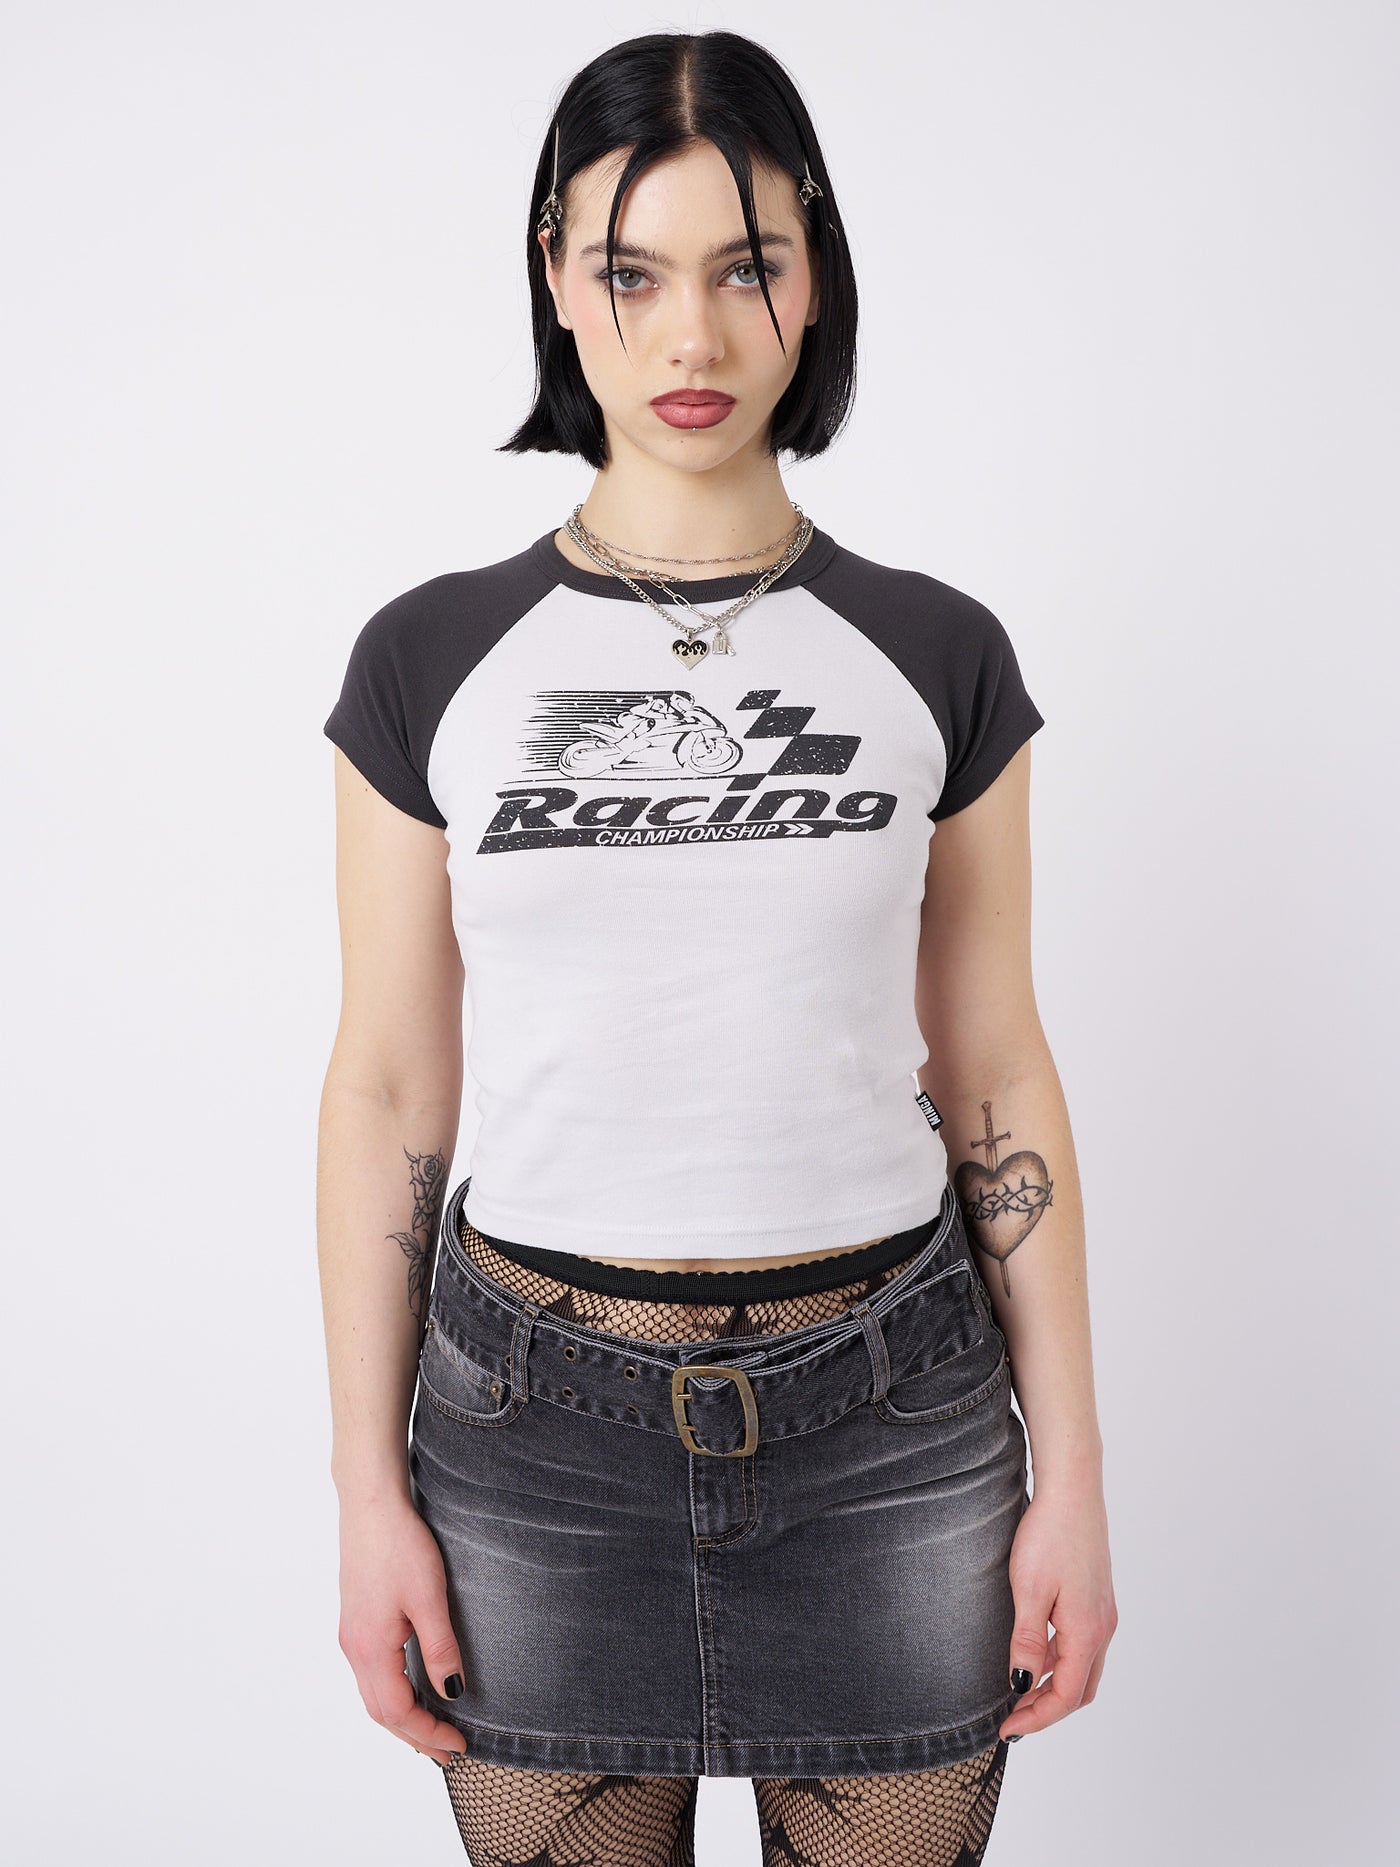 Dynamic black and white raglan baby tee inspired by motor racing. Perfect for a sporty and stylish casual look.